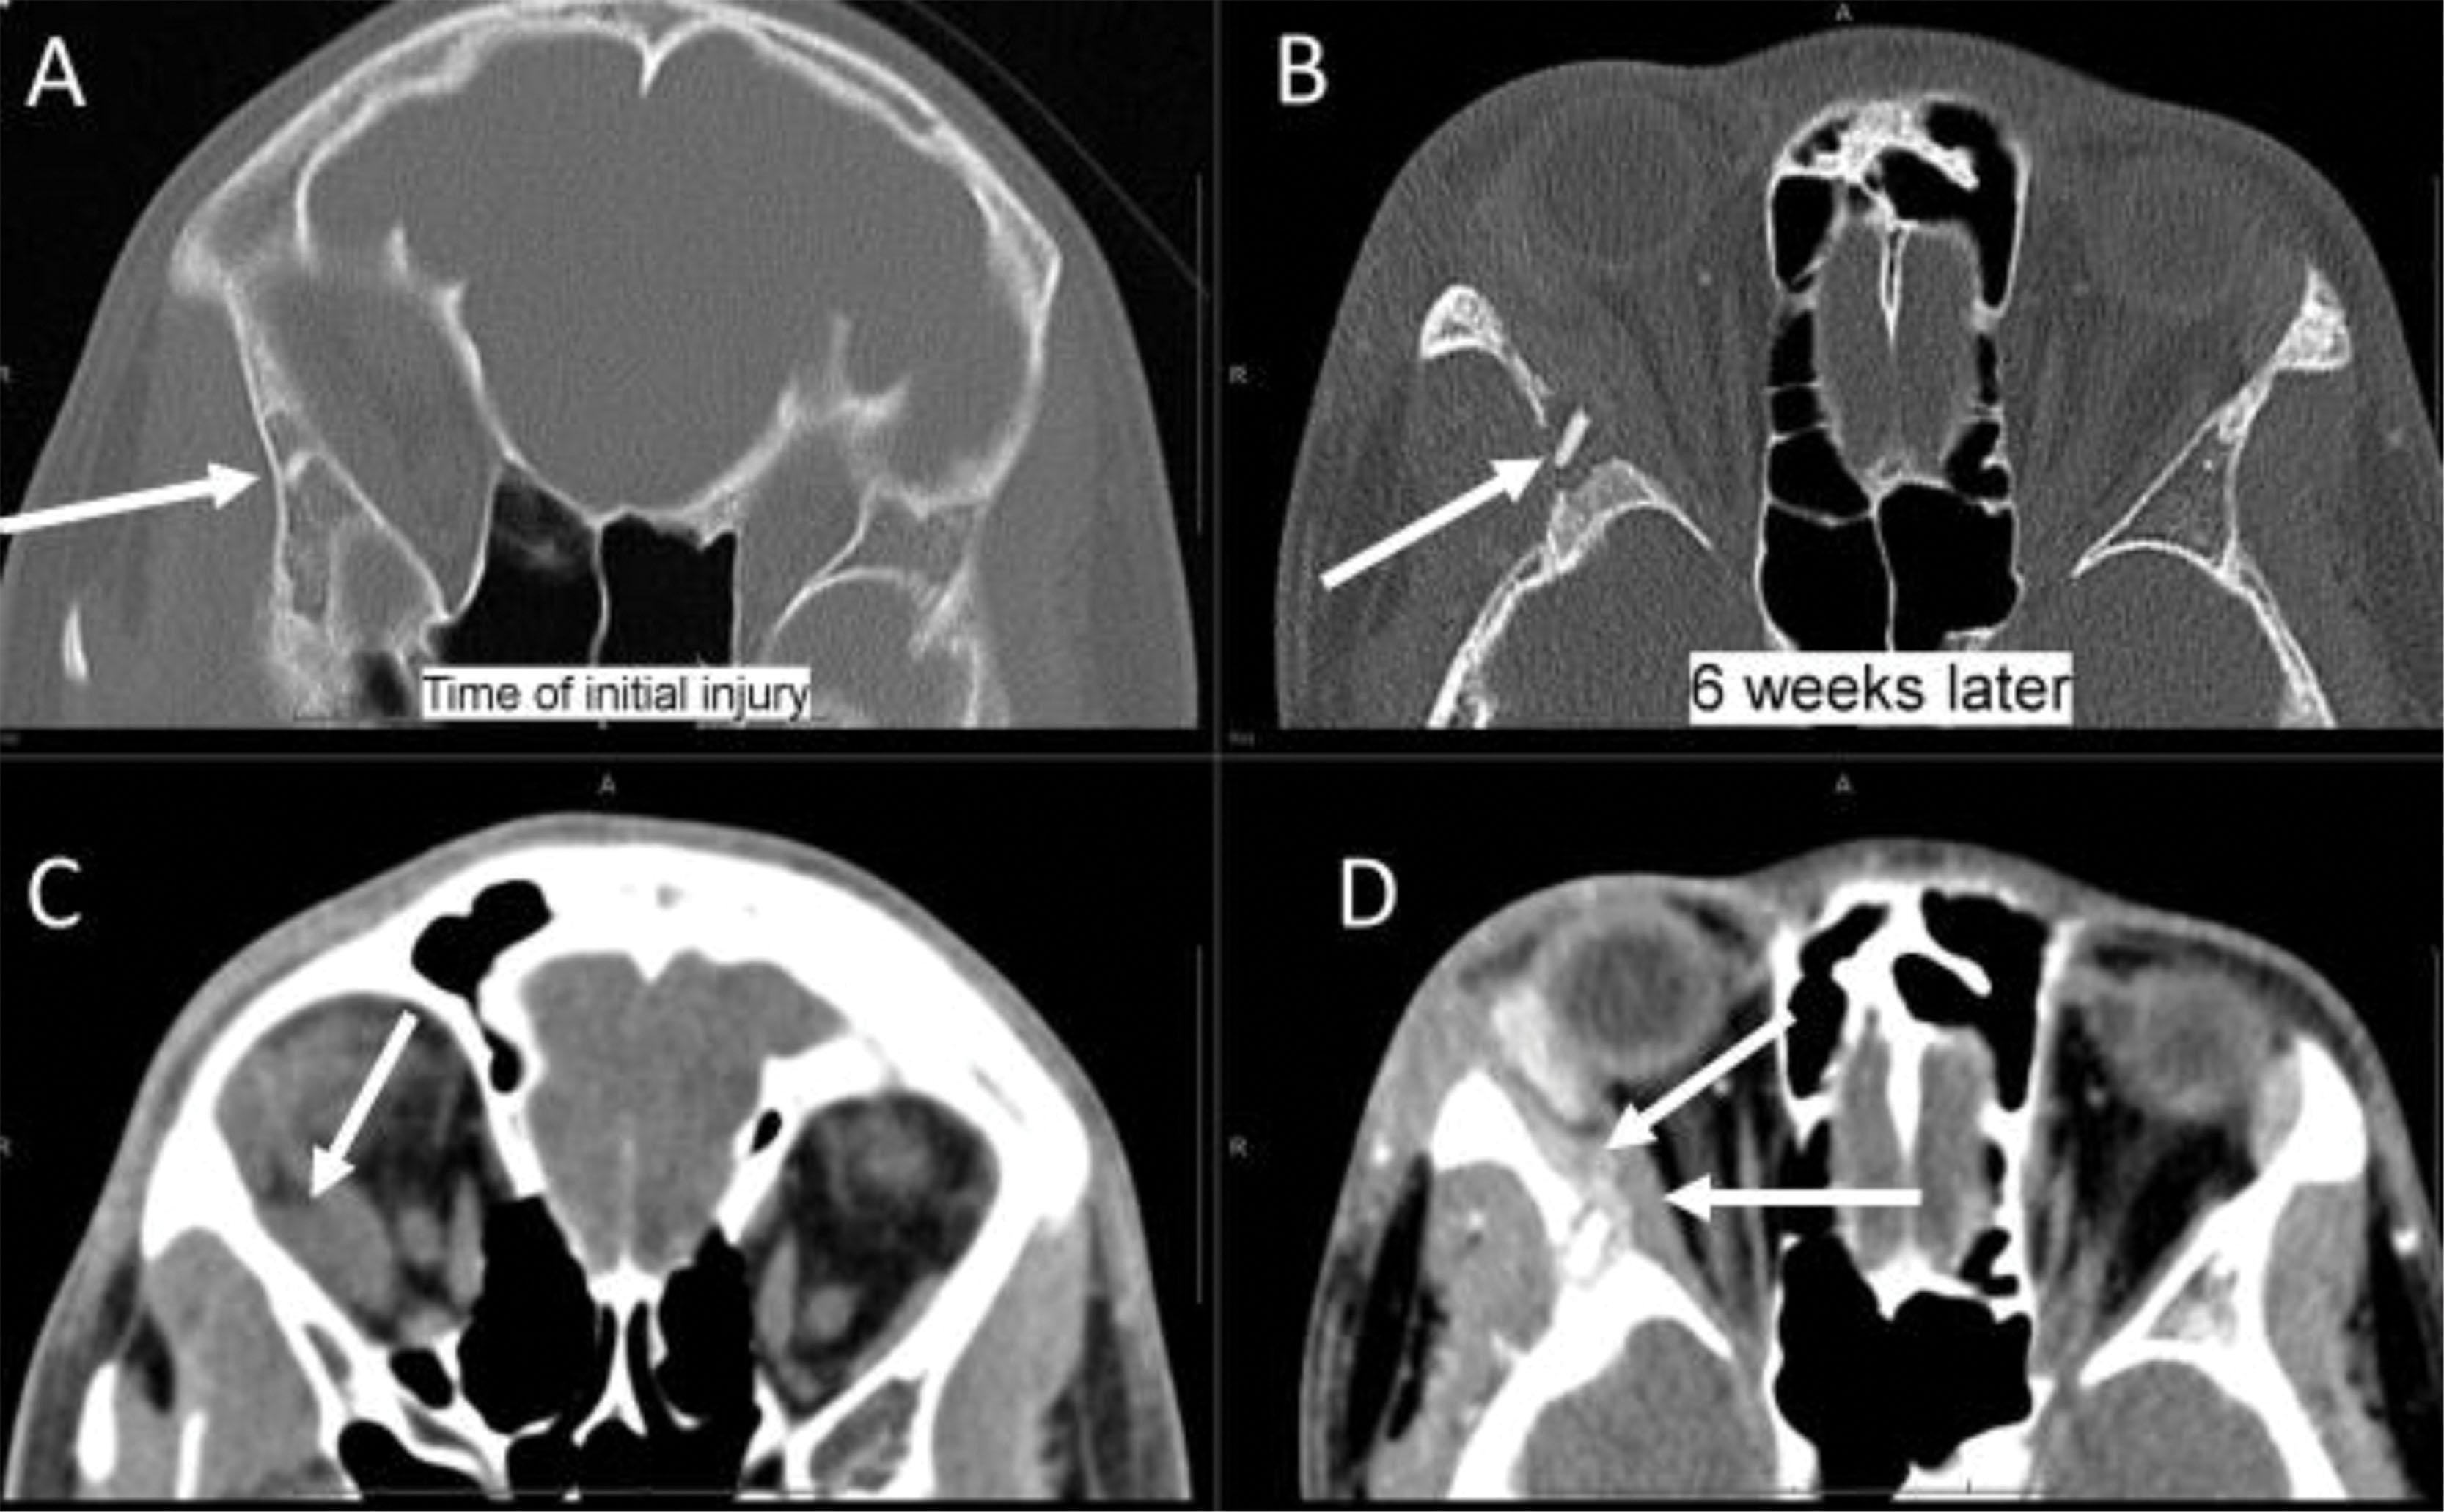 Fig. 9.2, In a 13-year-old boy with acute eye pain, contrast-enhanced axial CT (D) shows post septal inflammation adjacent to the displaced lateral rectus muscle (arrows), concerning for orbital cellulitis. There was also a hyperdense (bright on CT) structure (arrow in B) in the lateral orbital wall with surrounding osseous erosive change (B). With no known history, diagnostic considerations might have to include a bony sequestrum from infectious osteomyelitis or even a hyperdense nidus of an osteoid osteoma in an unusual location. However, this patient was stabbed by his brother with a pencil 6 weeks earlier. At that time, a non contrast CT had been performed (A and C) for “trauma” before anyone admitted to the pencil incident, only orbital hemorrhage was reported (arrow in C), and the hyperdense structure was missed (arrow in A). After the patient gave a more complete history, the second CT scan led to surgery where a small piece of graphite from the pencil was removed from the orbital wall. Clinical history can be crucial to image interpretation. 3 4